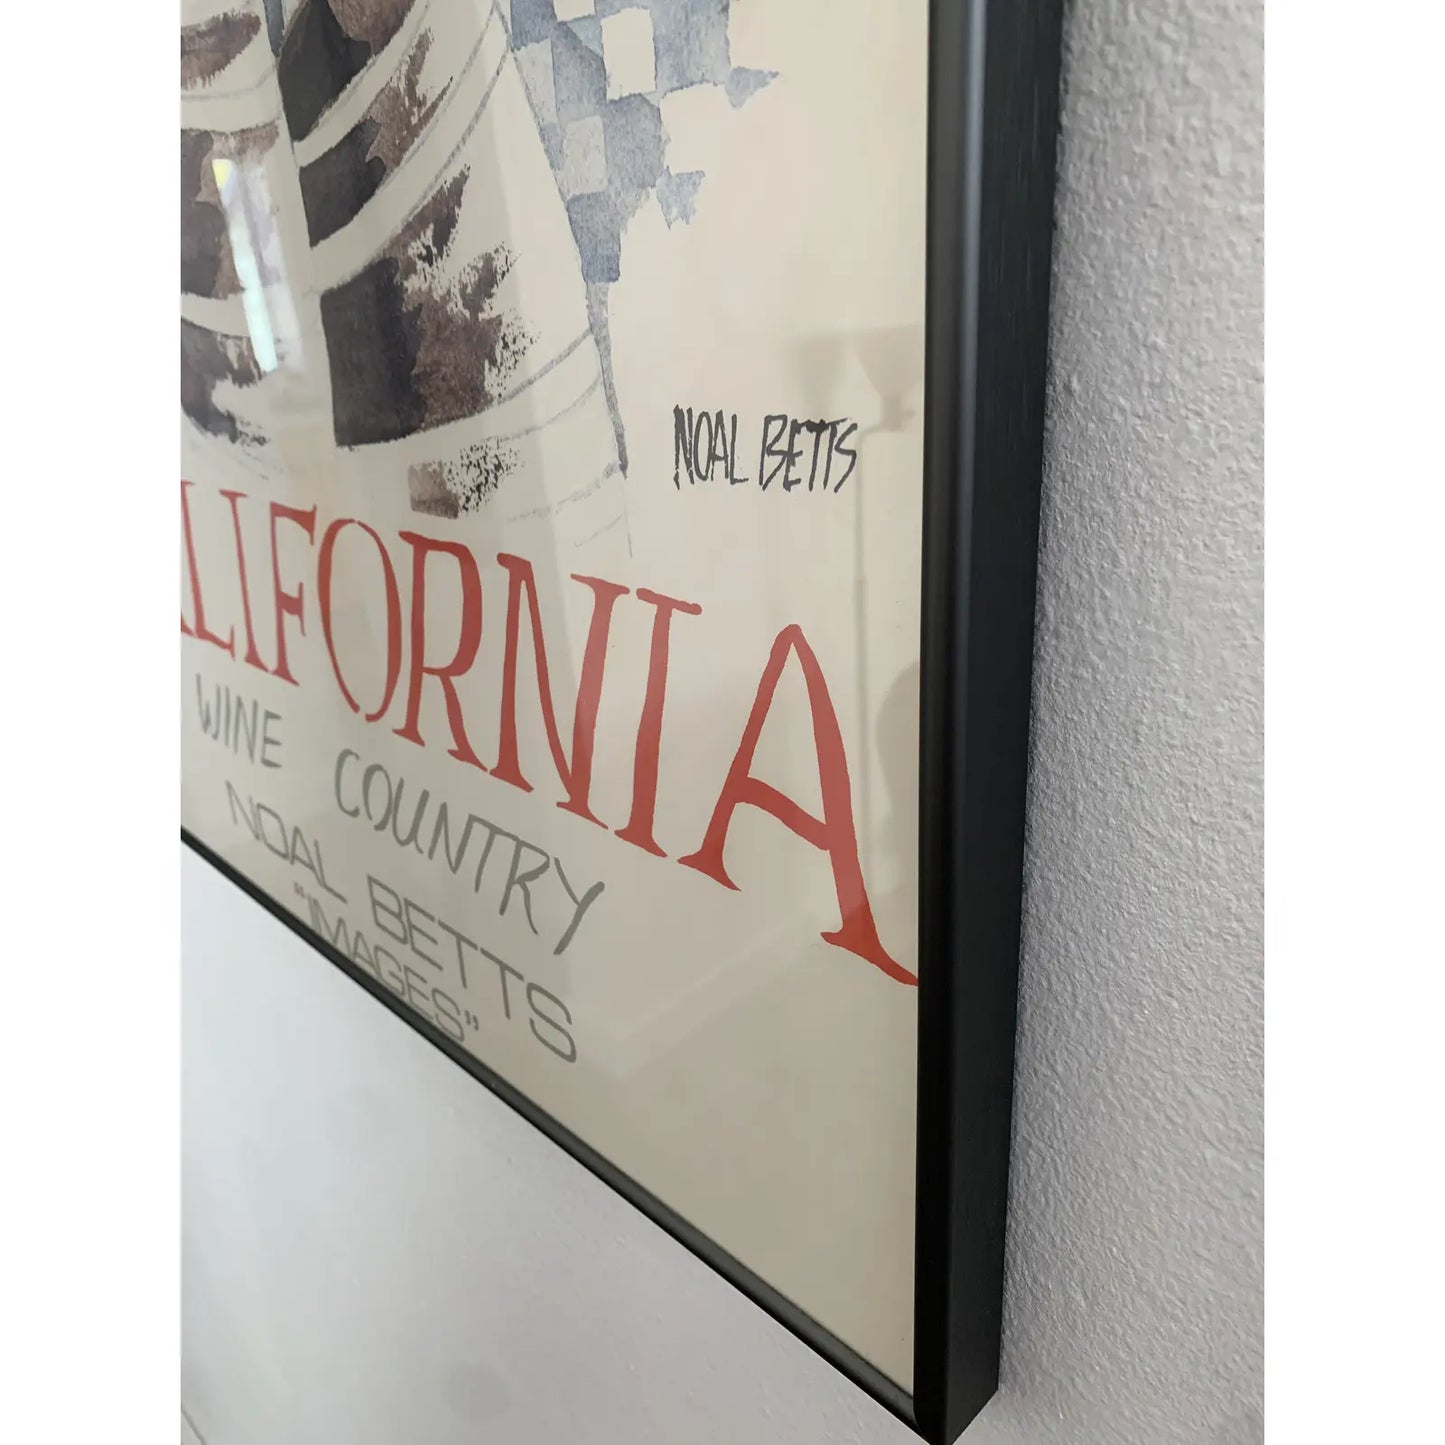 1980s Noal Betts California Wine Country Lithograph Poster, Framed